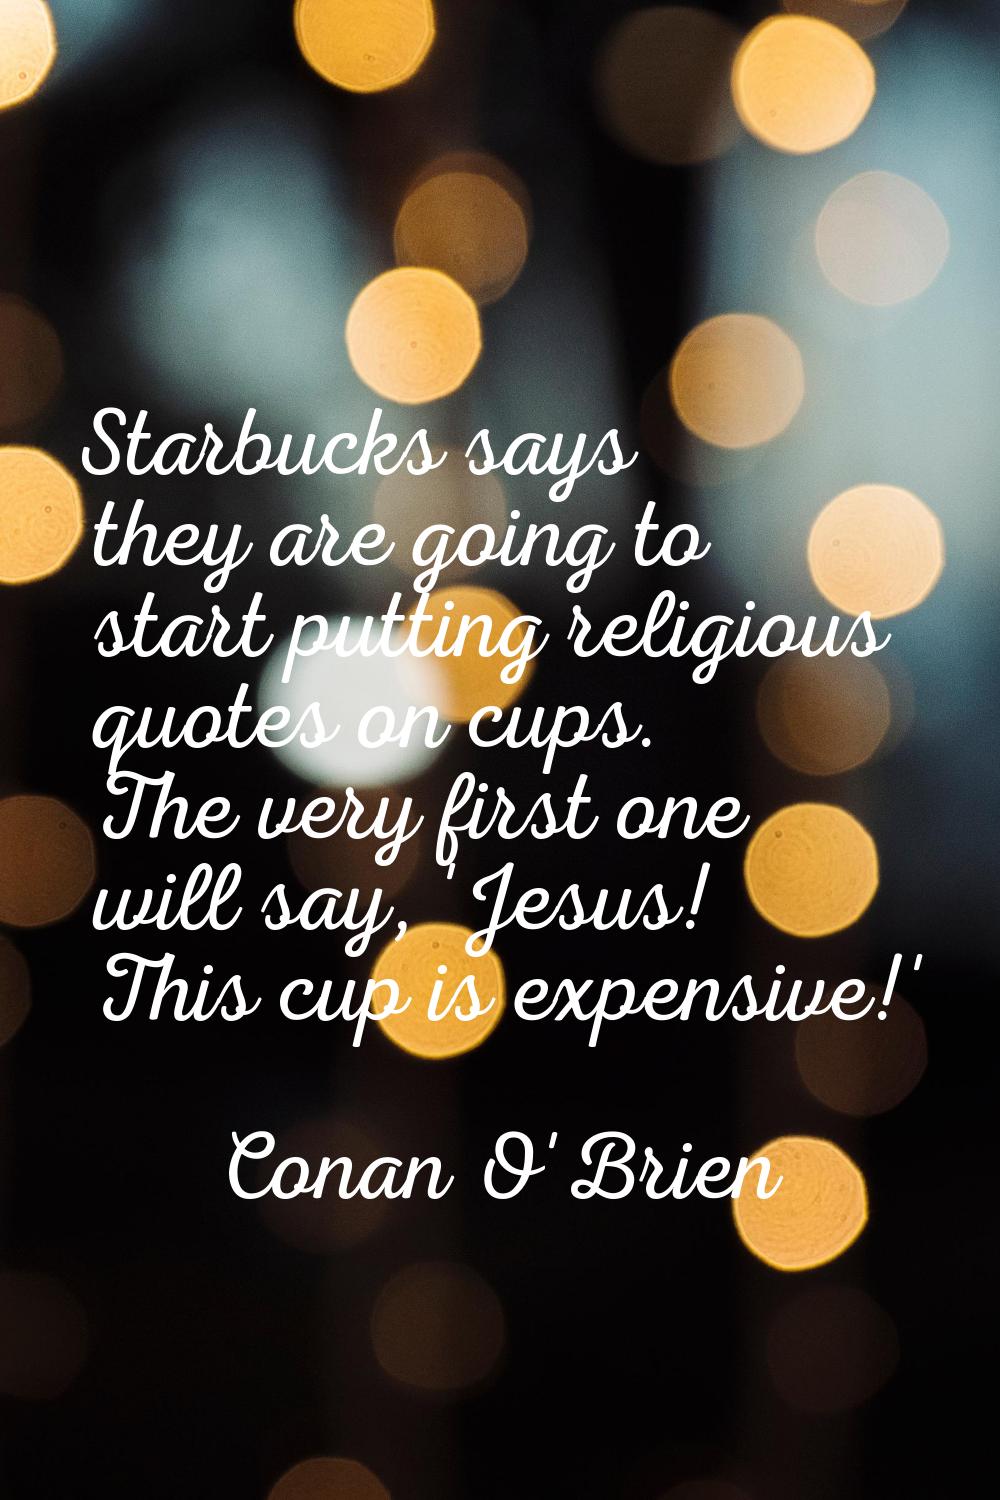 Starbucks says they are going to start putting religious quotes on cups. The very first one will sa